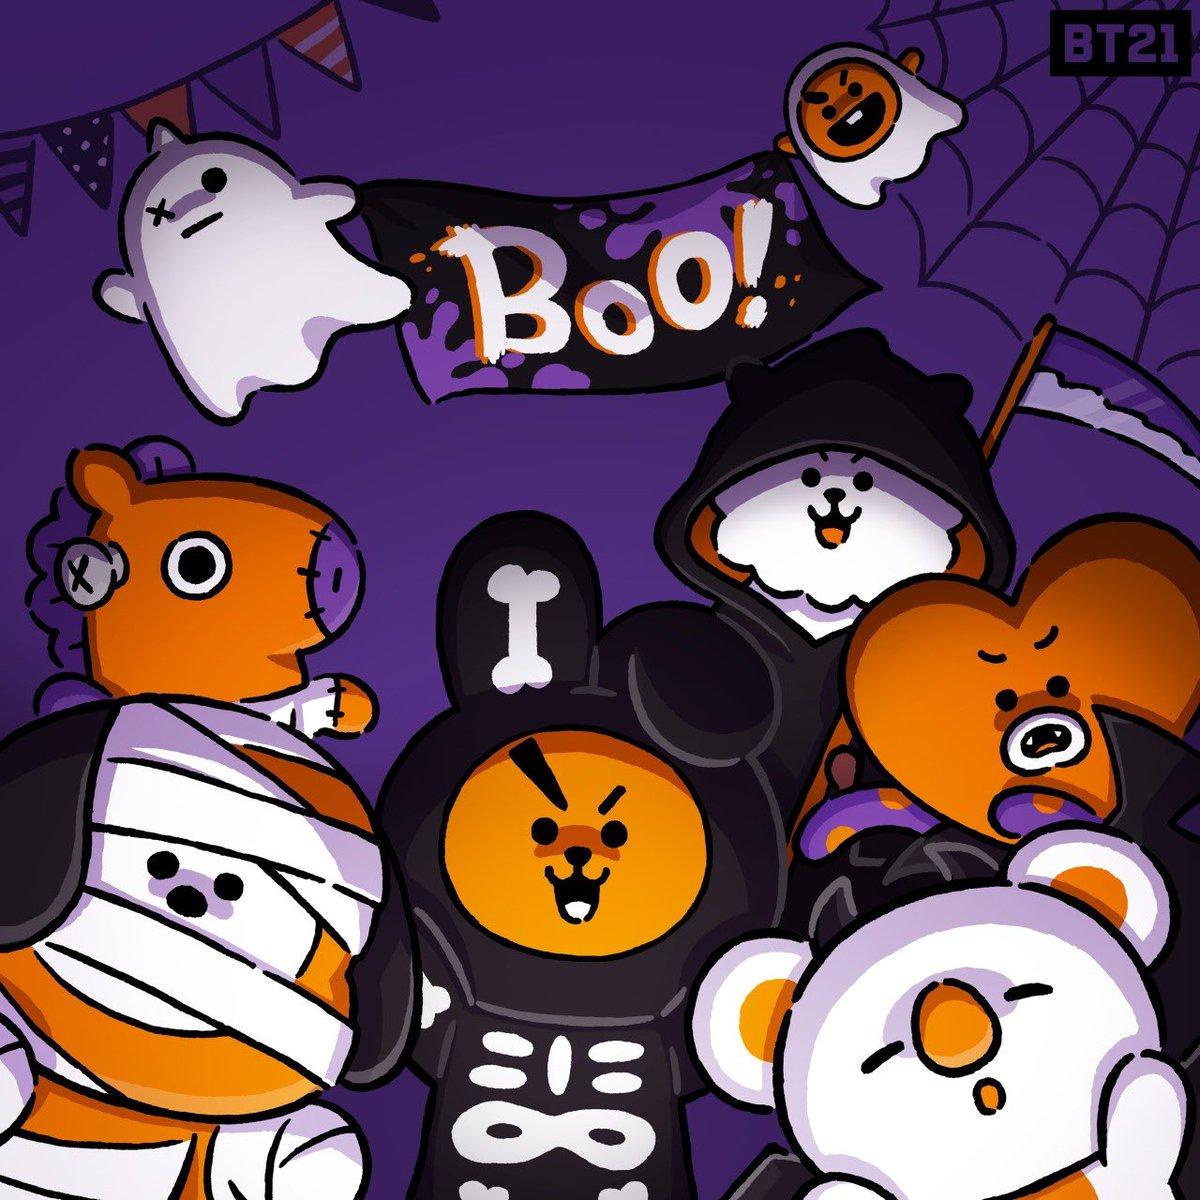 Android BT21 Halloween Wallpapers - Wallpaper Cave